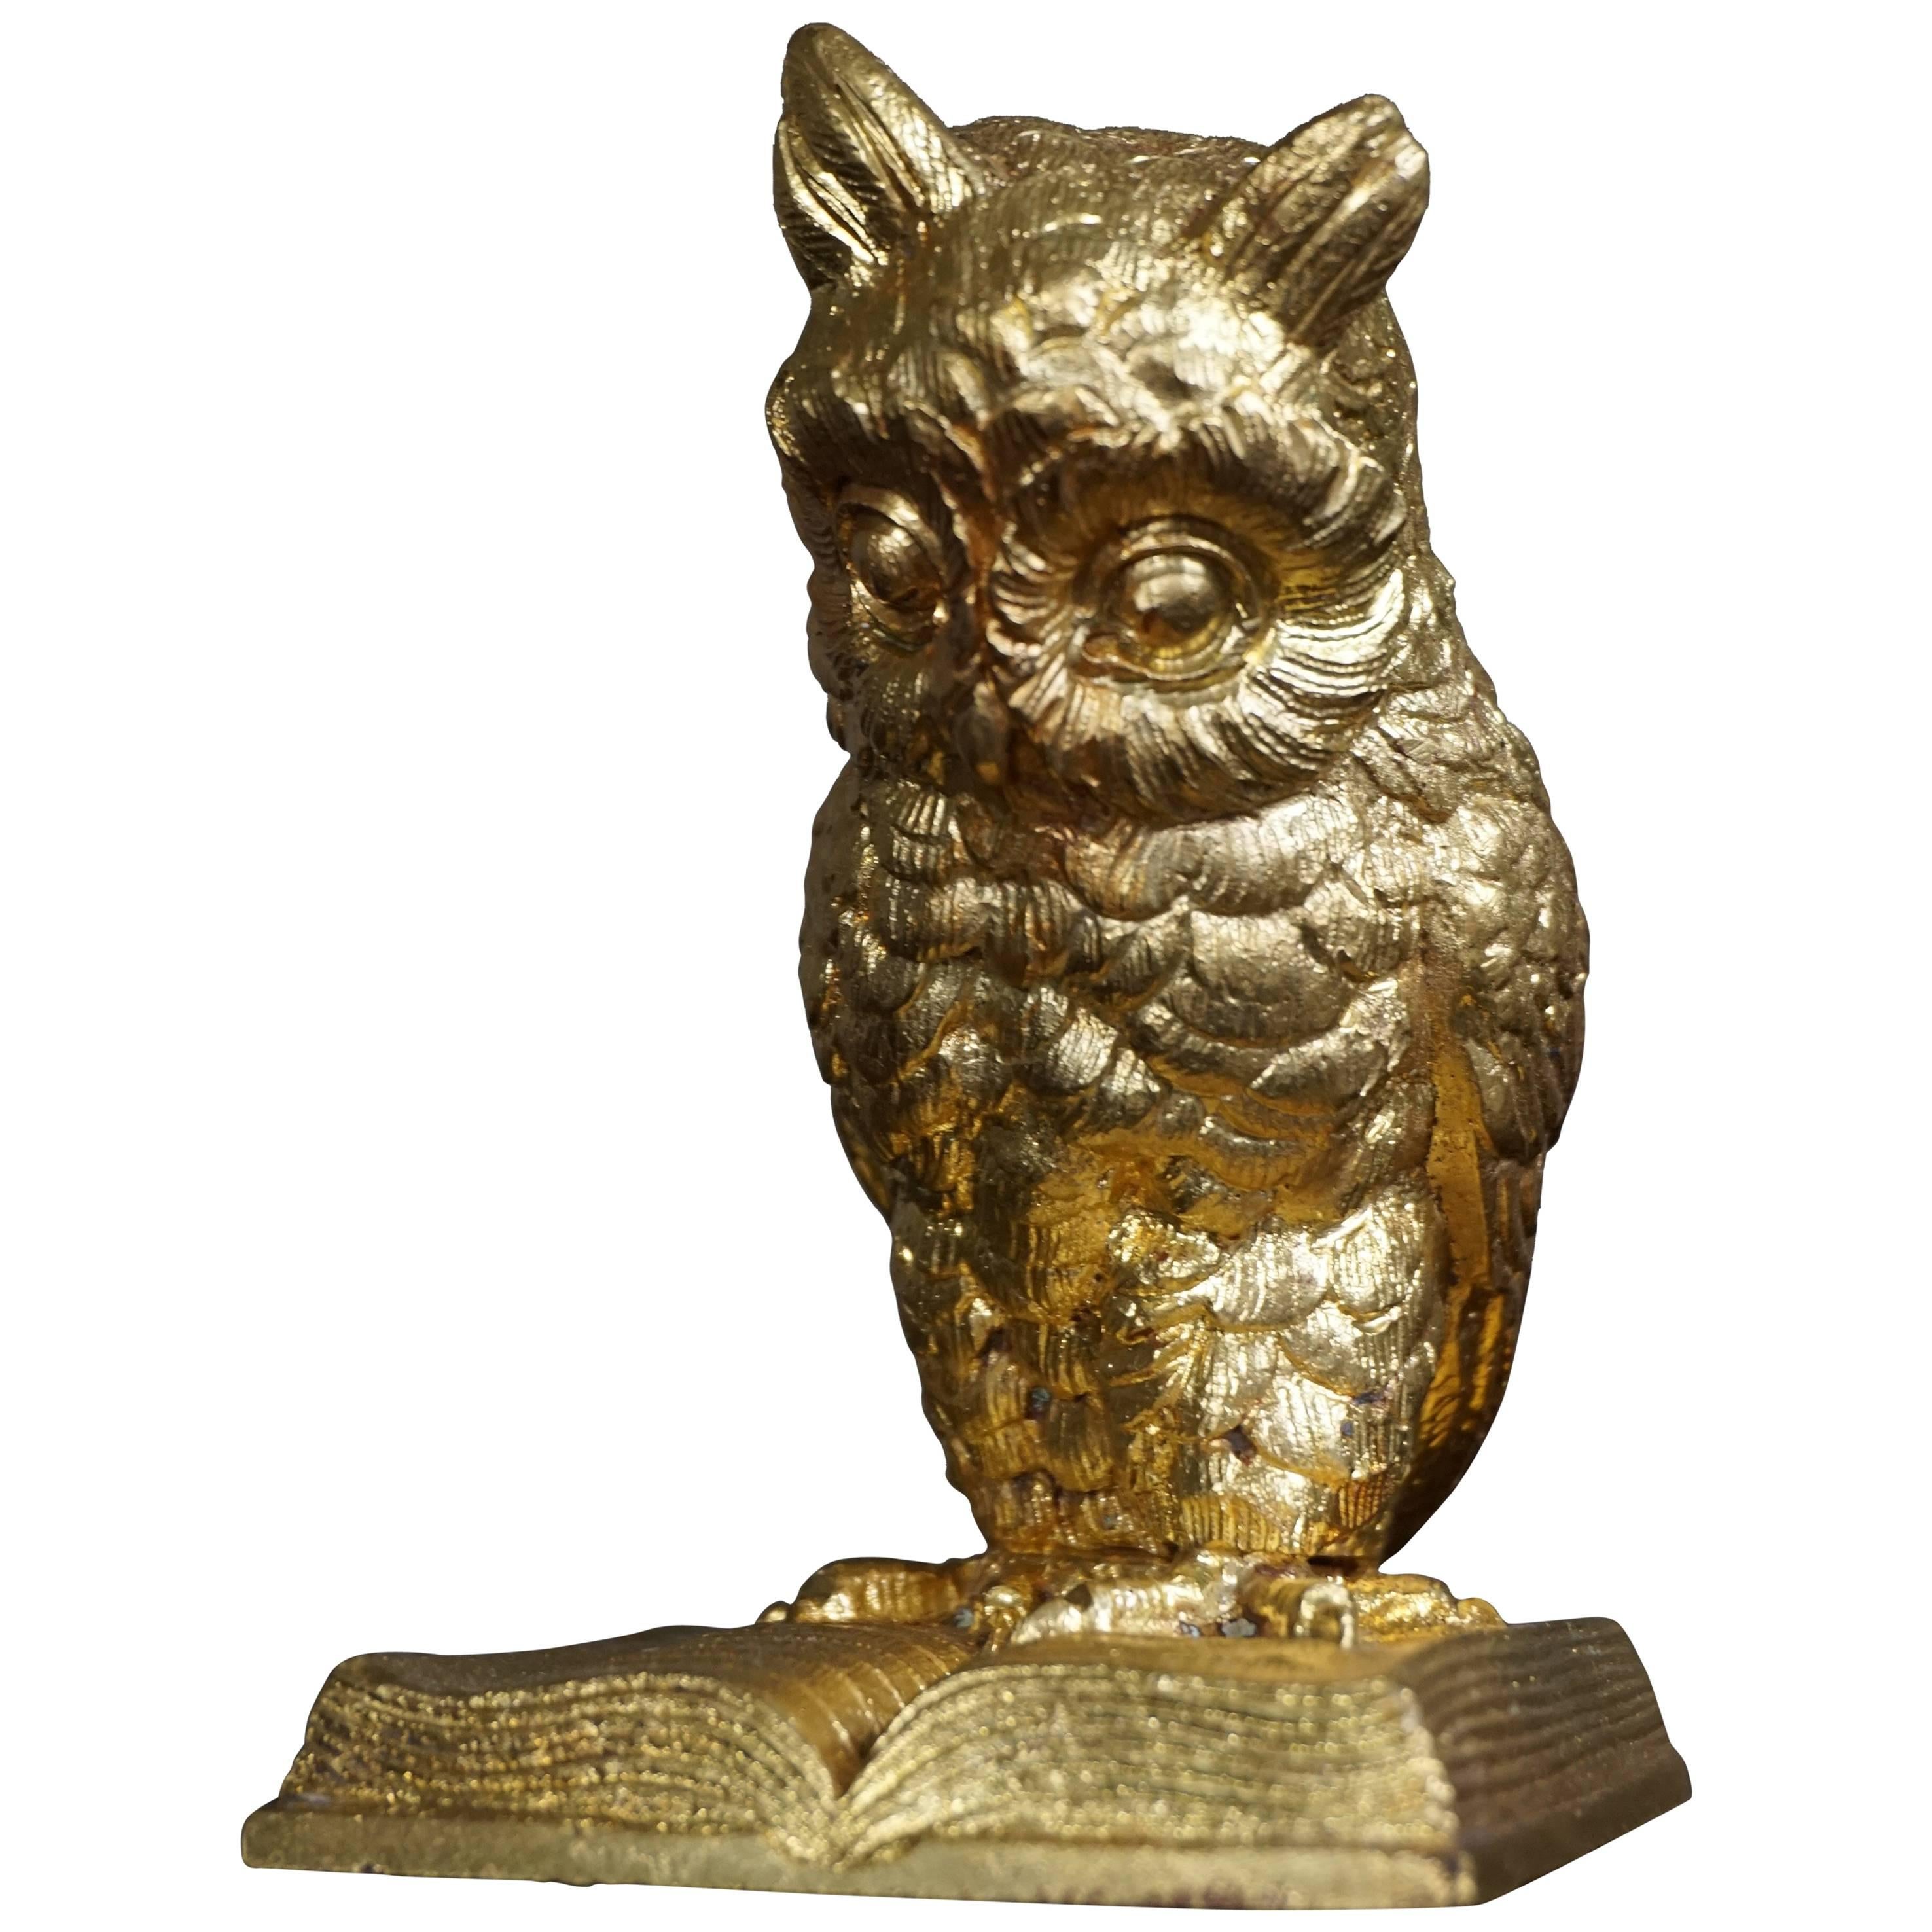 Late 19th Century Small Antique Gilt Bronze Owl on Book Sculpture, Paperweight